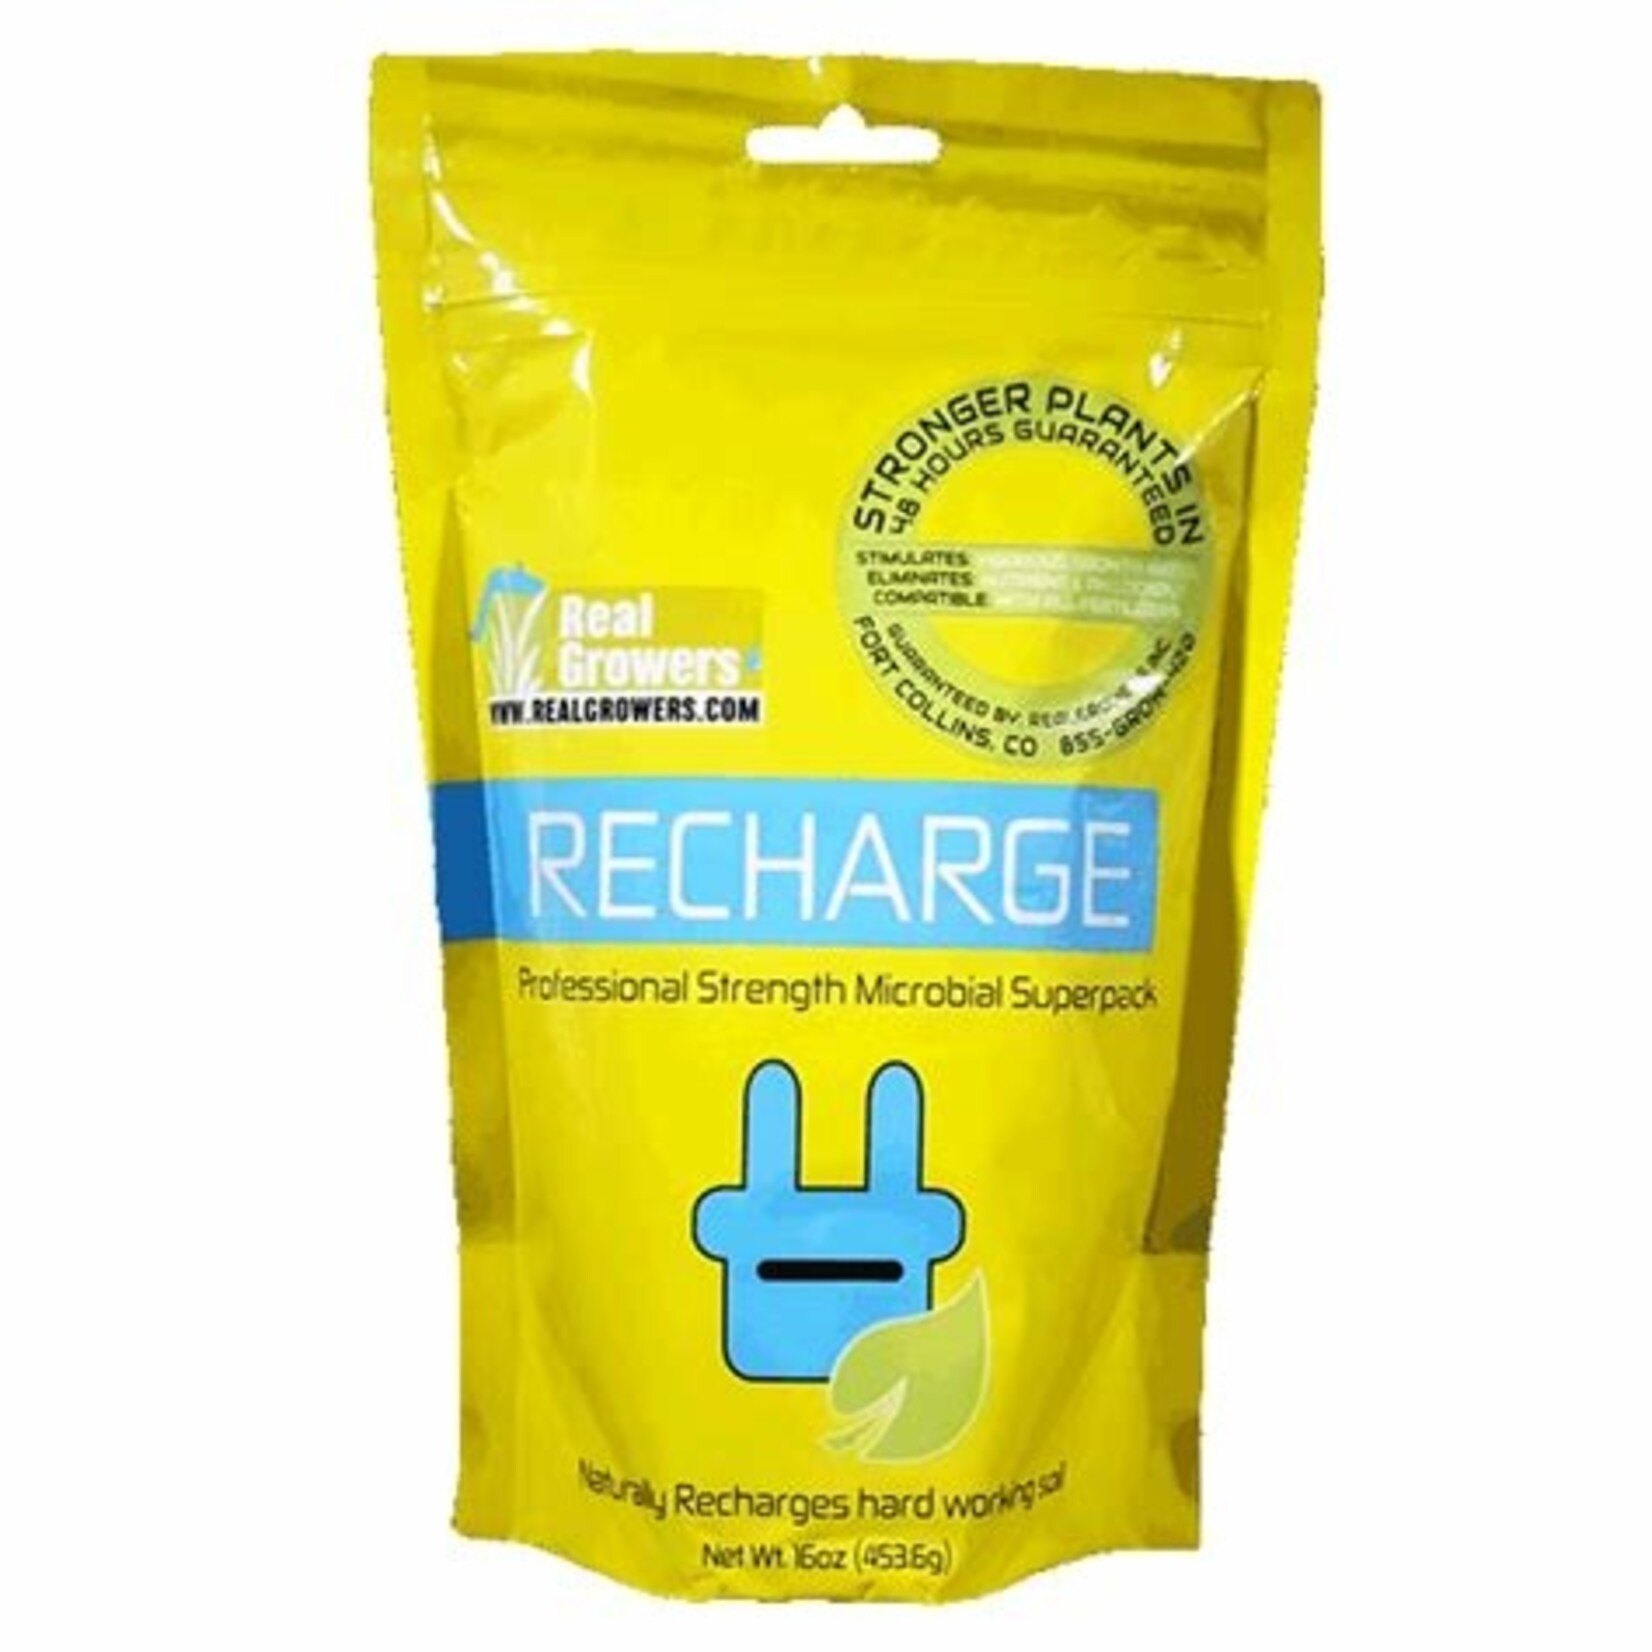 Real Growers Recharge 16 OZ BAG  Natural Soil Conditioner